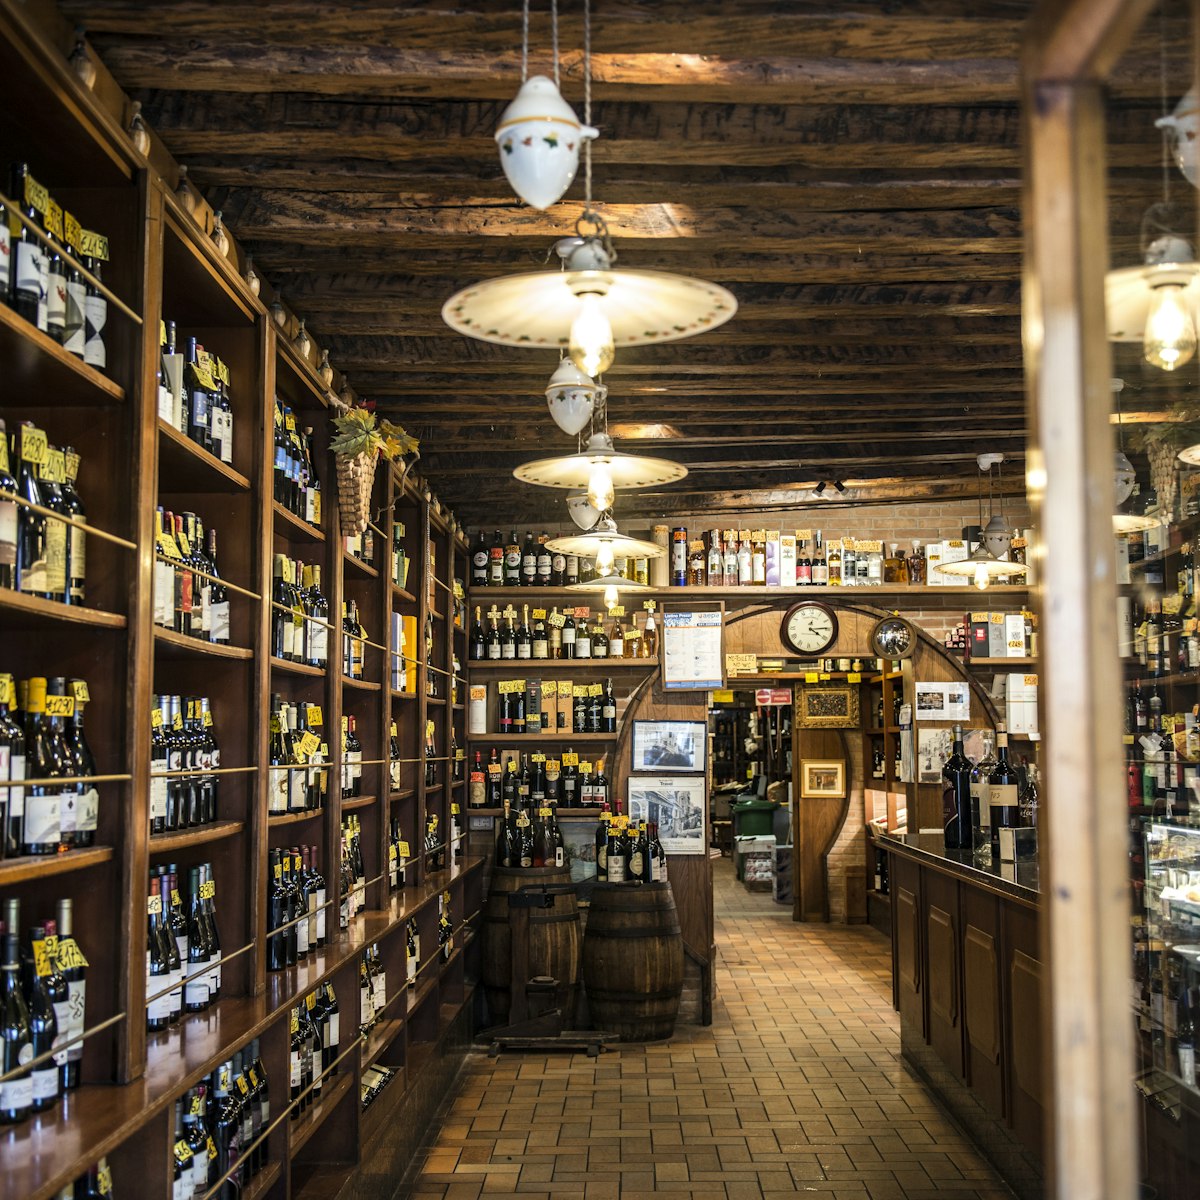 Cantine del Vino già Schiavi: Legendary tavern with floor-to-ceiling bottles lining the walls, with wines by the glass & snacks.